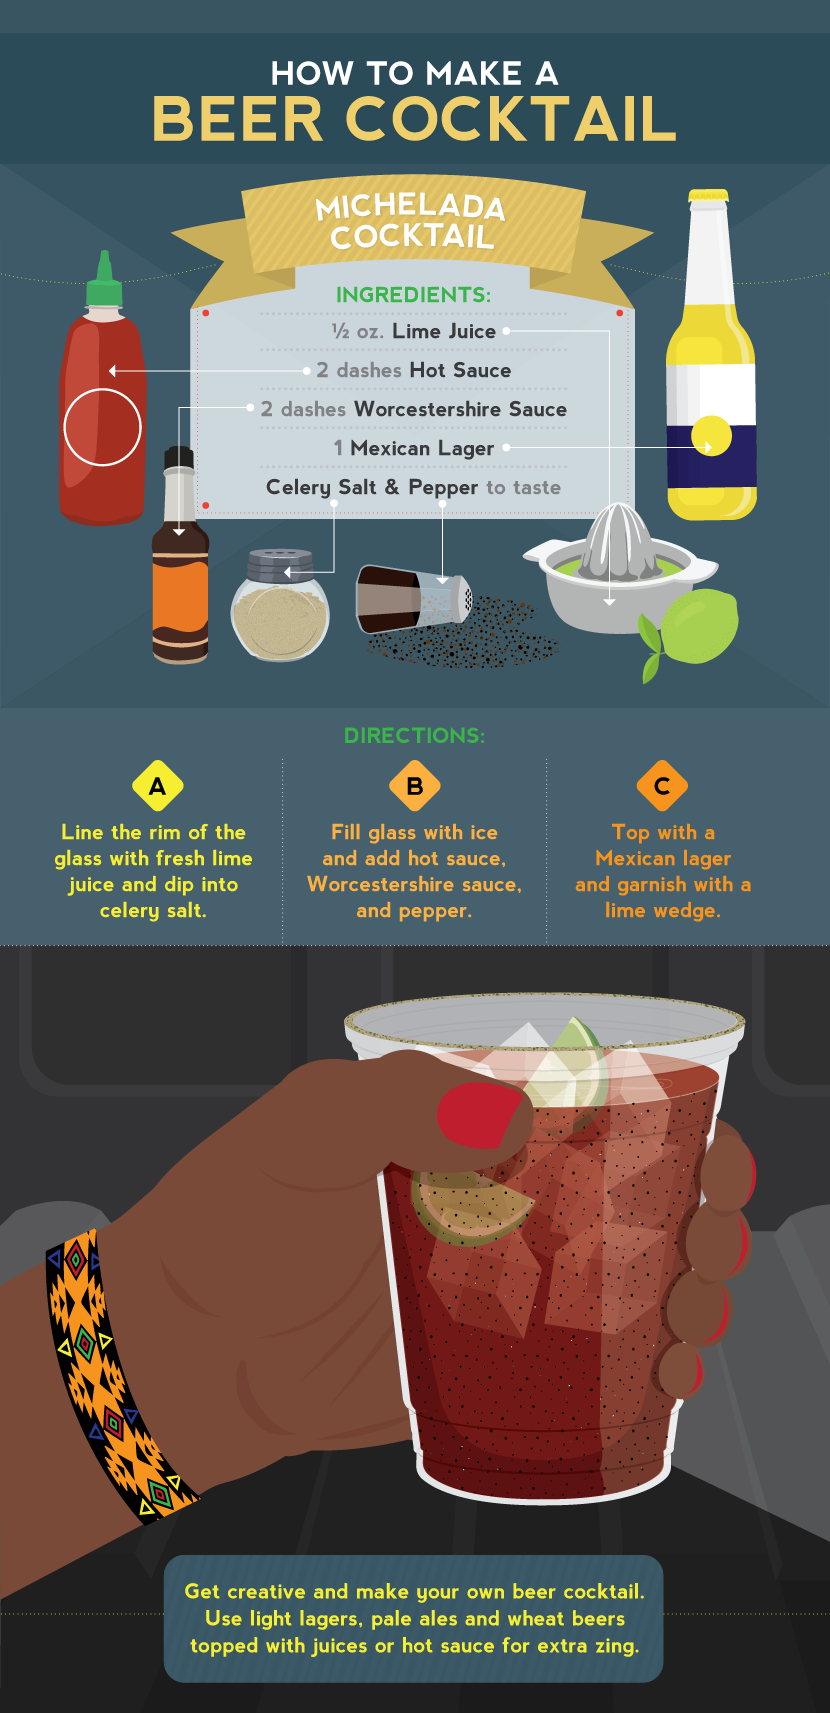 Make a Beer Cocktail - How to Make Cocktails for a Tailgate